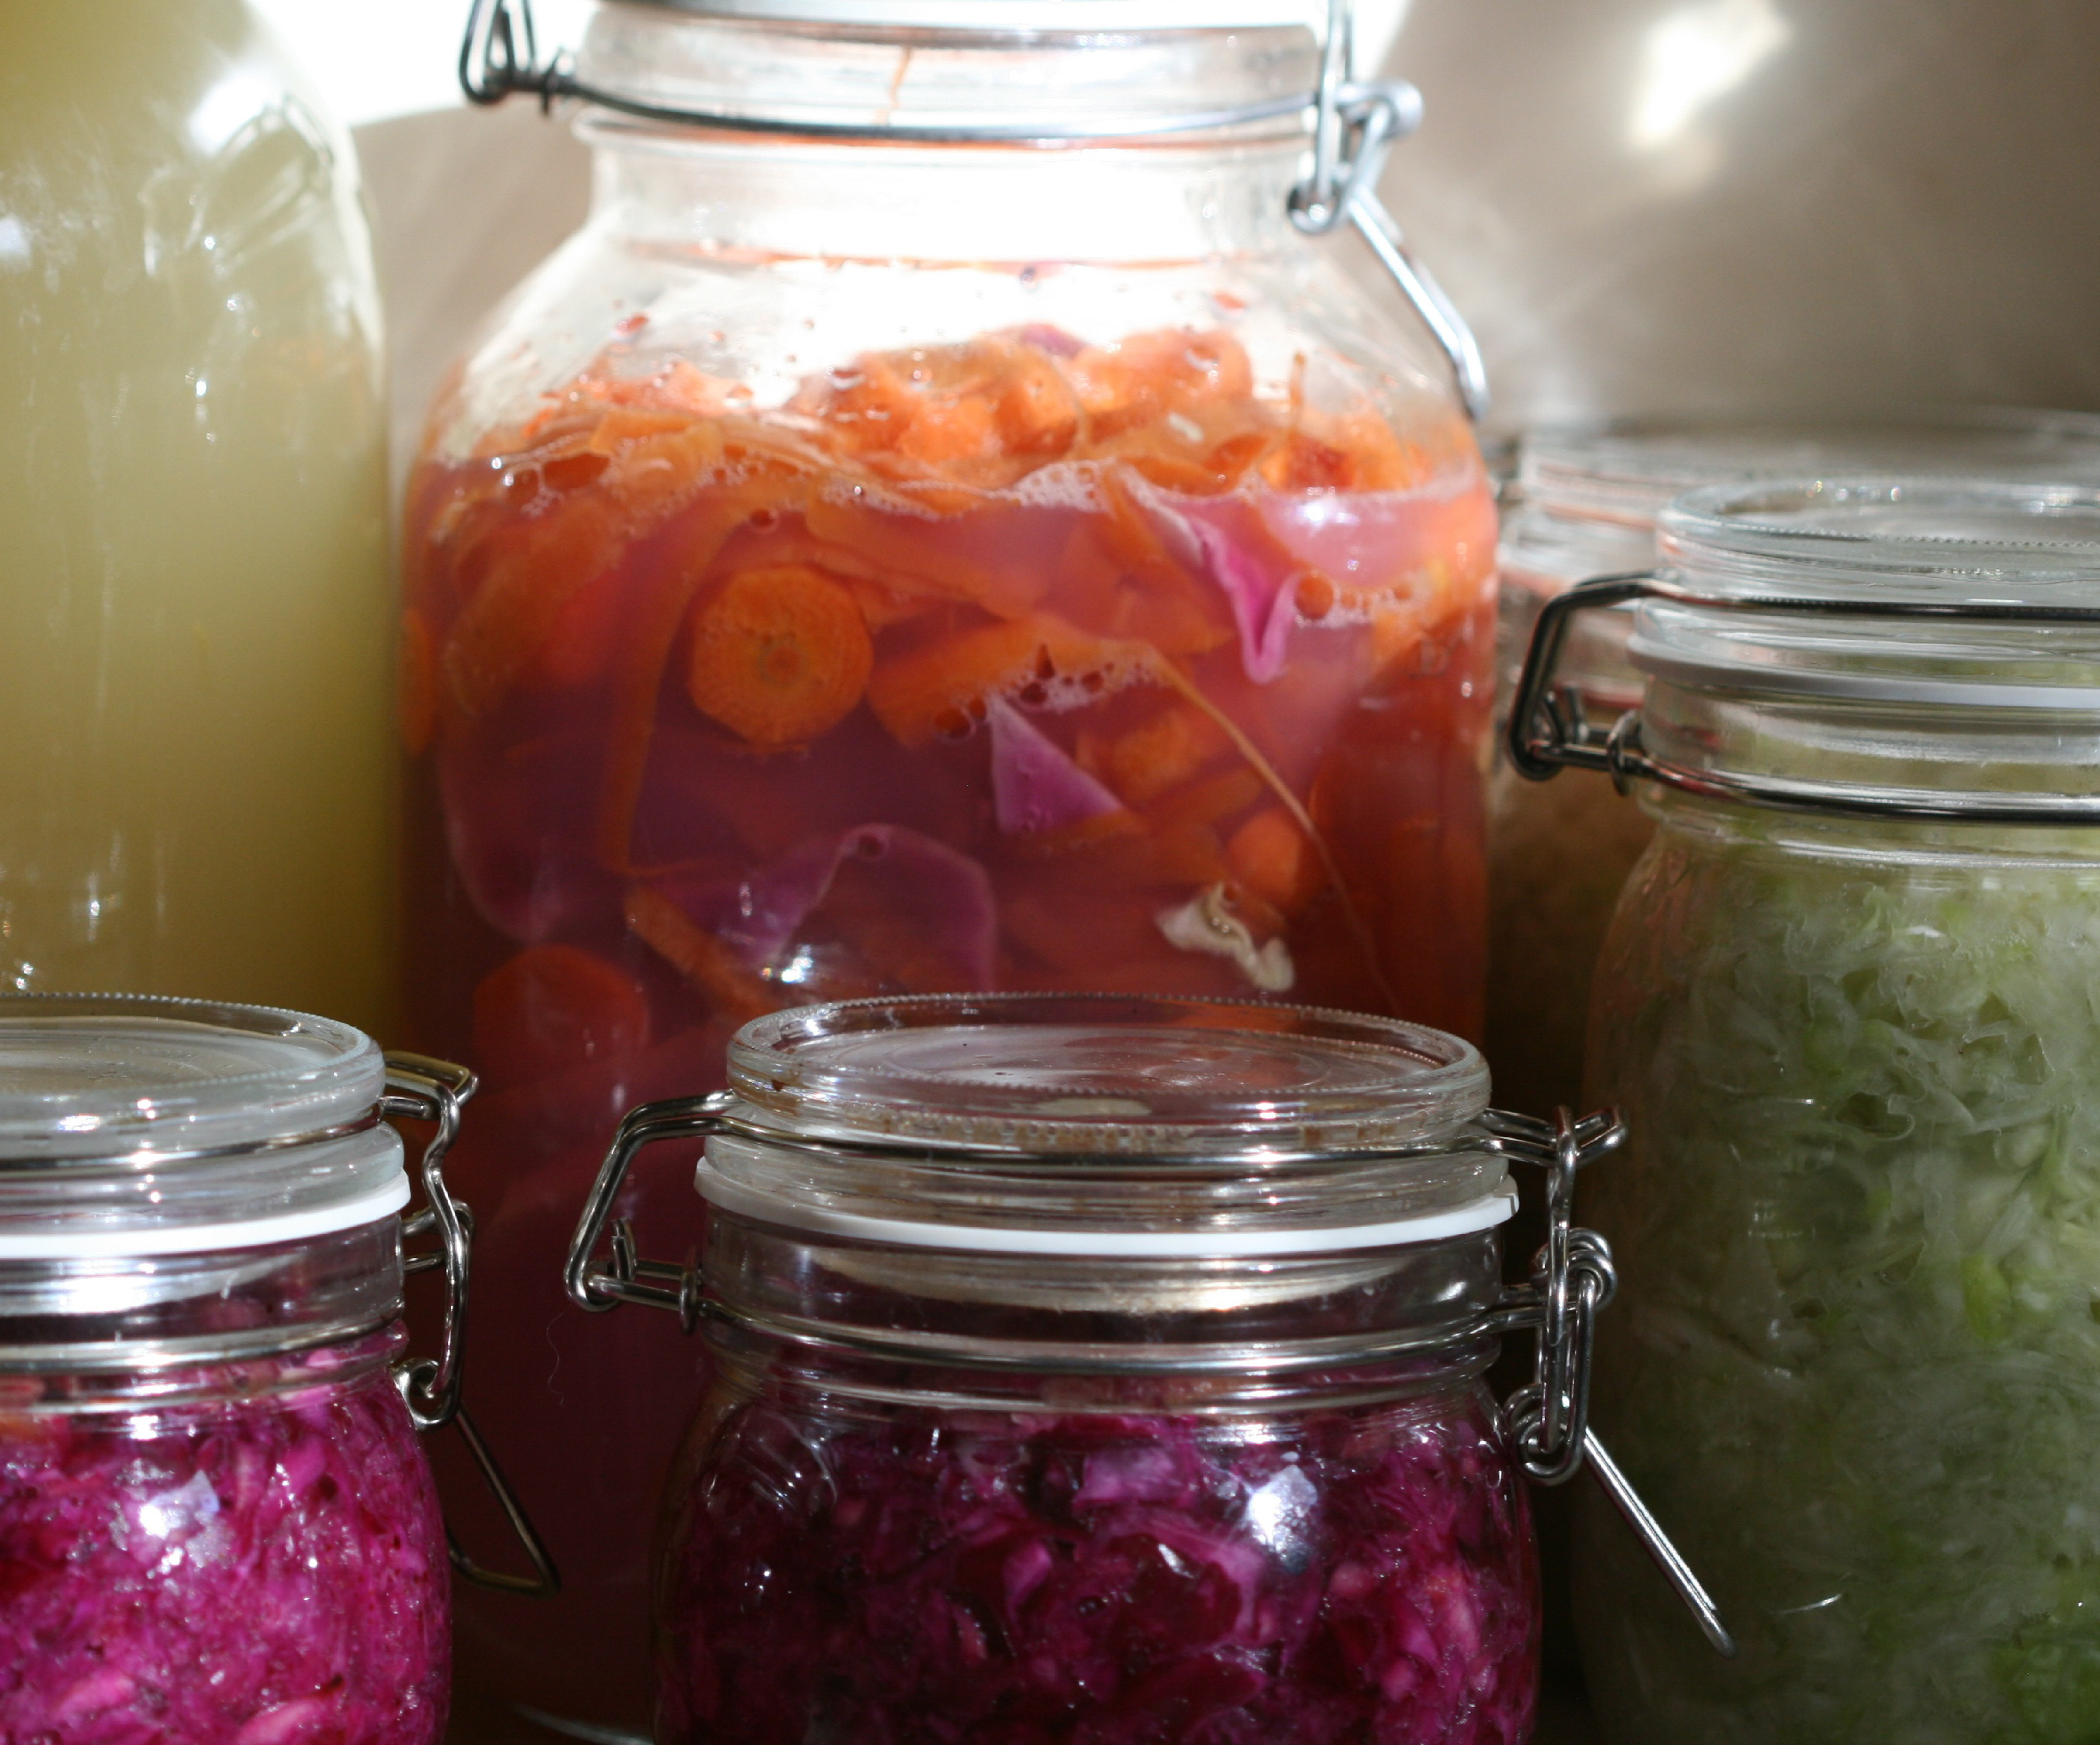 Come along to this hands-on workshop to learn about the age-old practice of fermenting fruit and vegetables to reduce food waste and improve your gut health.